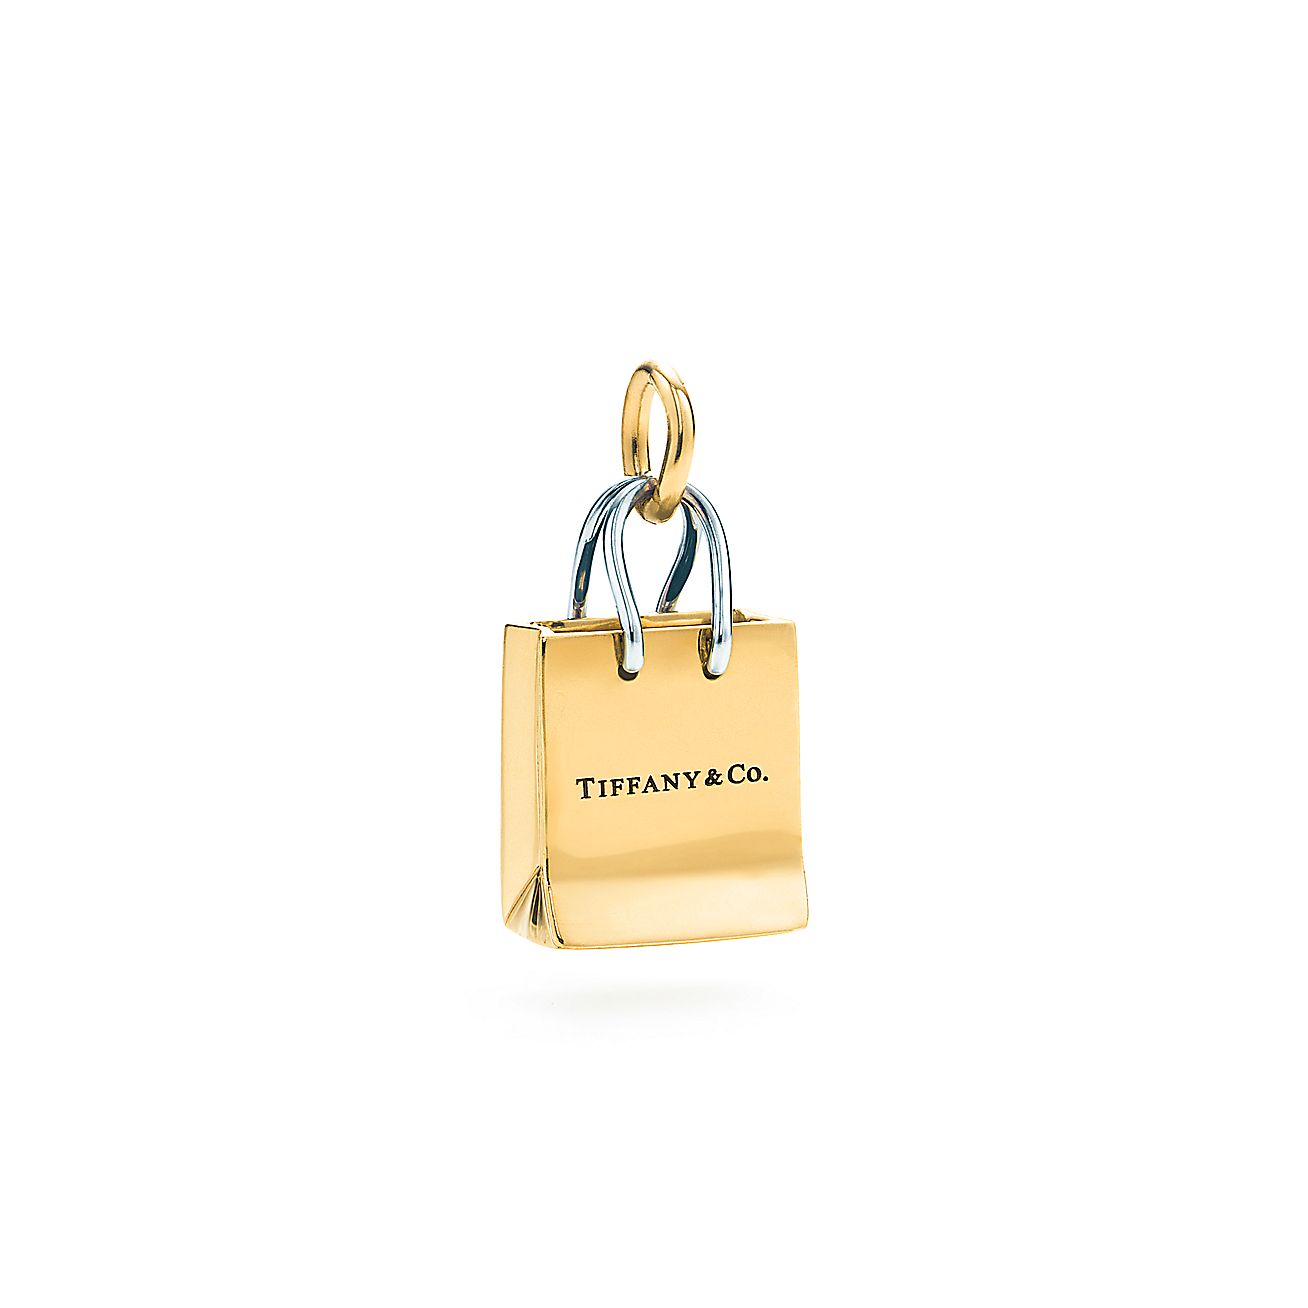 Tiffany & Co.® shopping bag charm. Yellow and white gold. | Tiffany & Co.